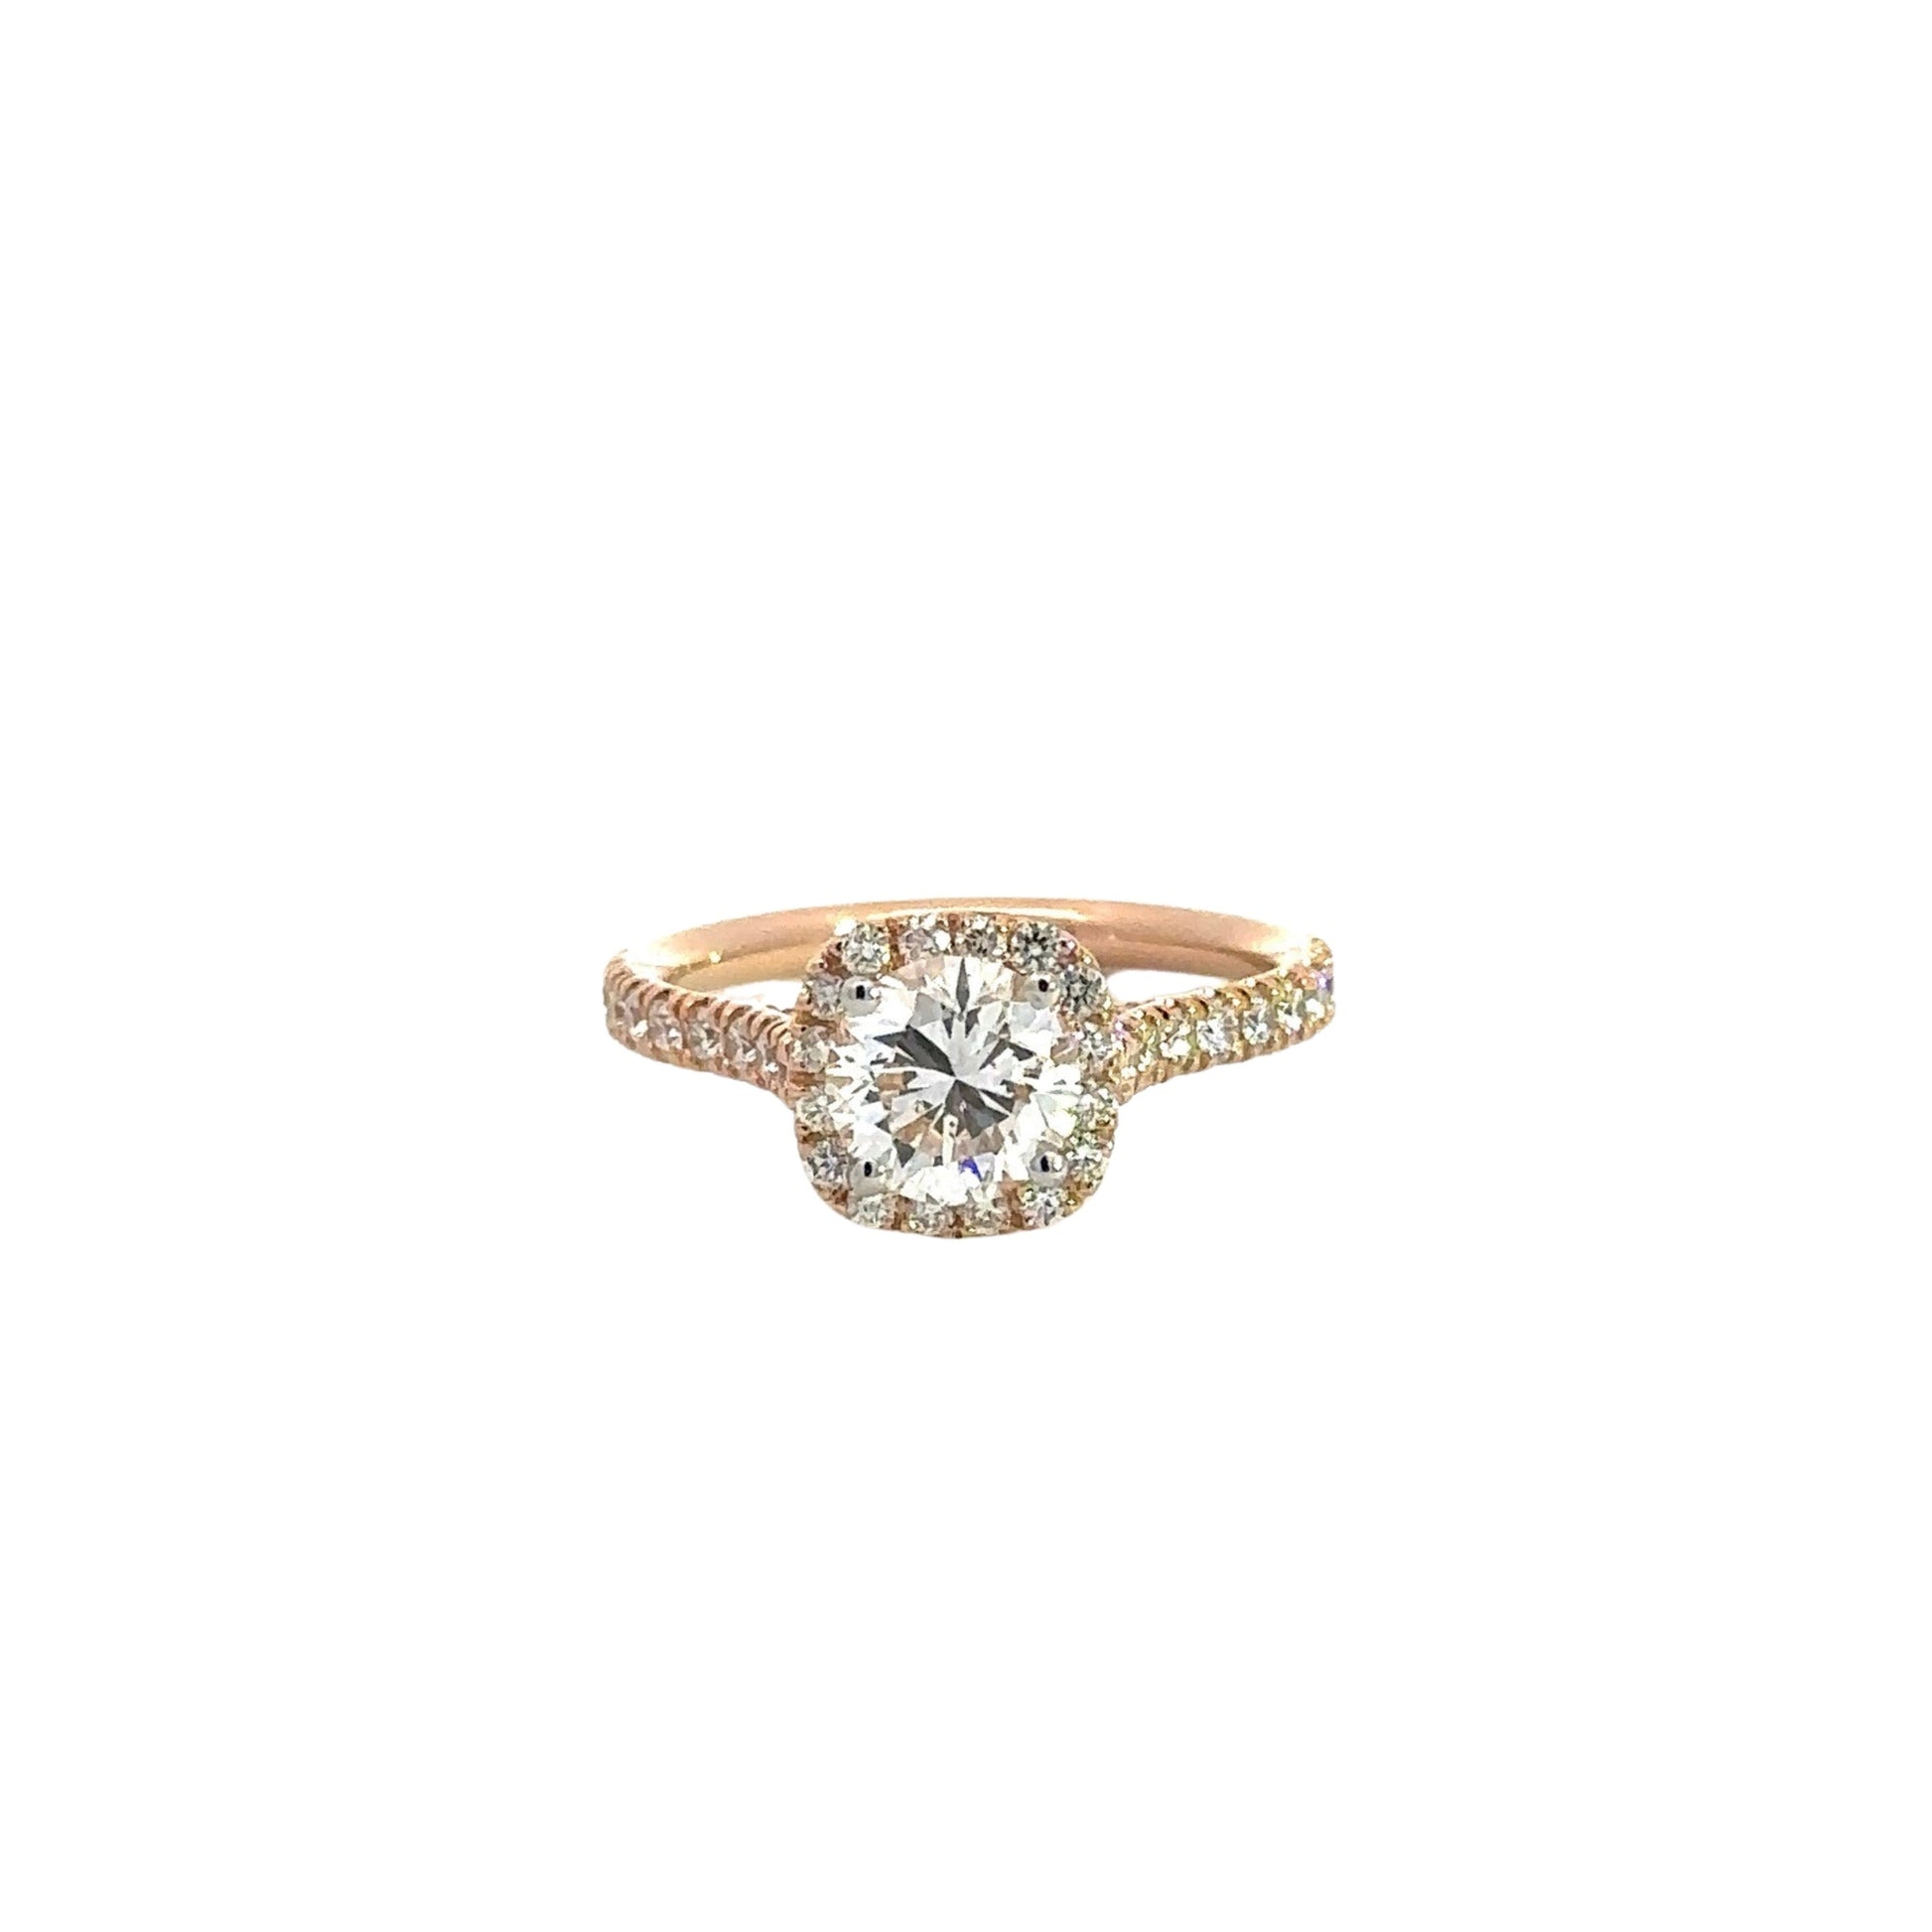 Front of rose gold diamond ring with 1.02 carat round diamond in the center and 16 small round diamonds around the center-stone and small round diamonds on the band. 